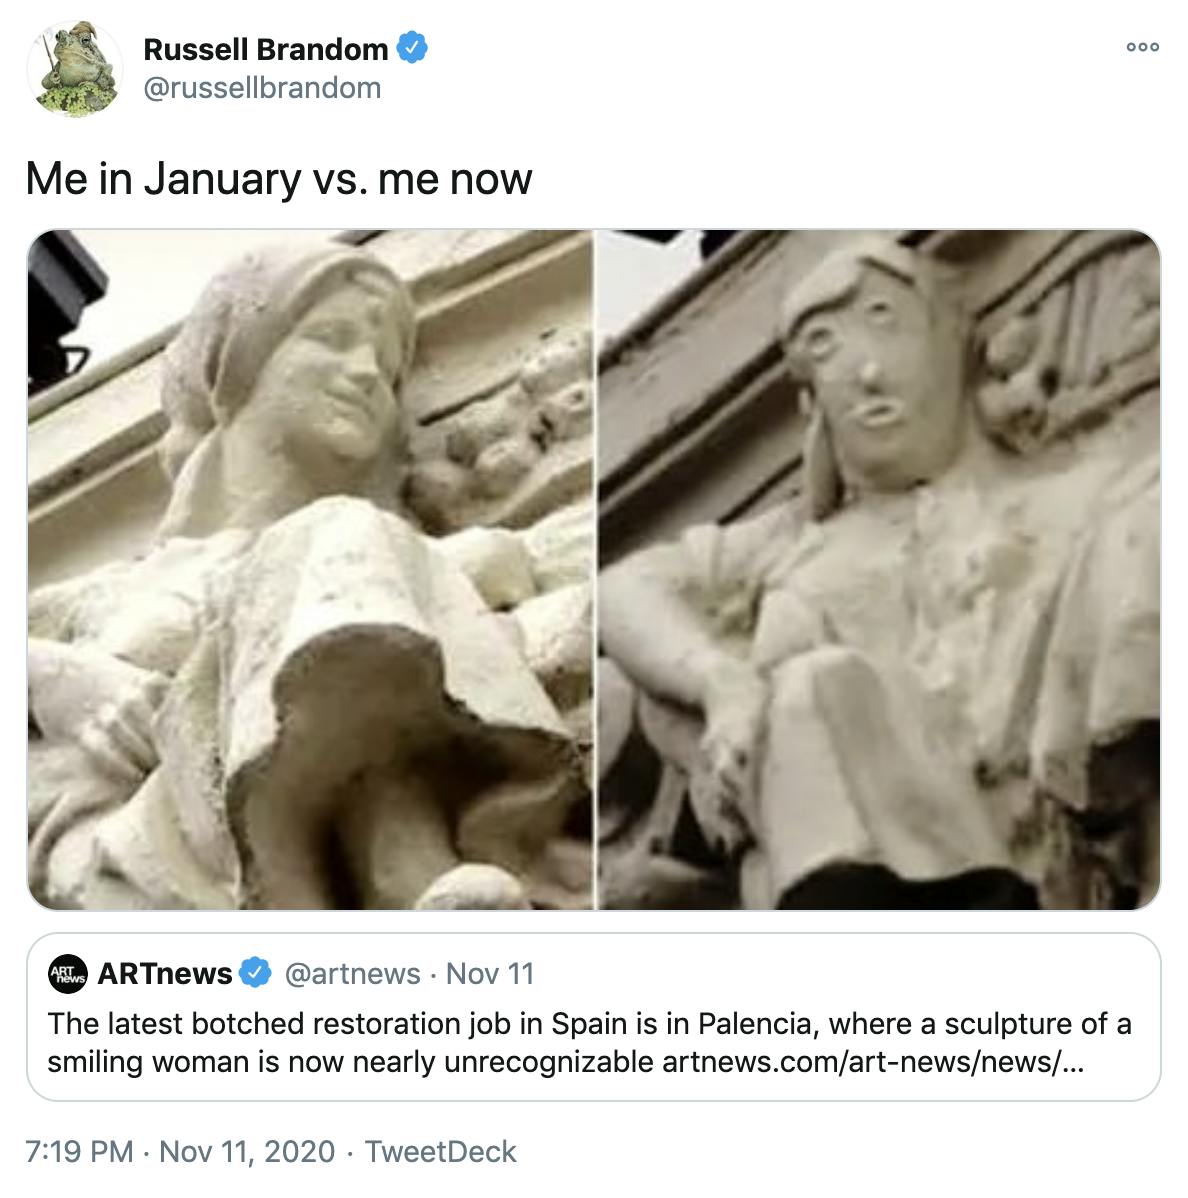 'Me in January vs. me now ' a photograph of the original, realistic sculpture next to the restored version with it's blobby abstract features